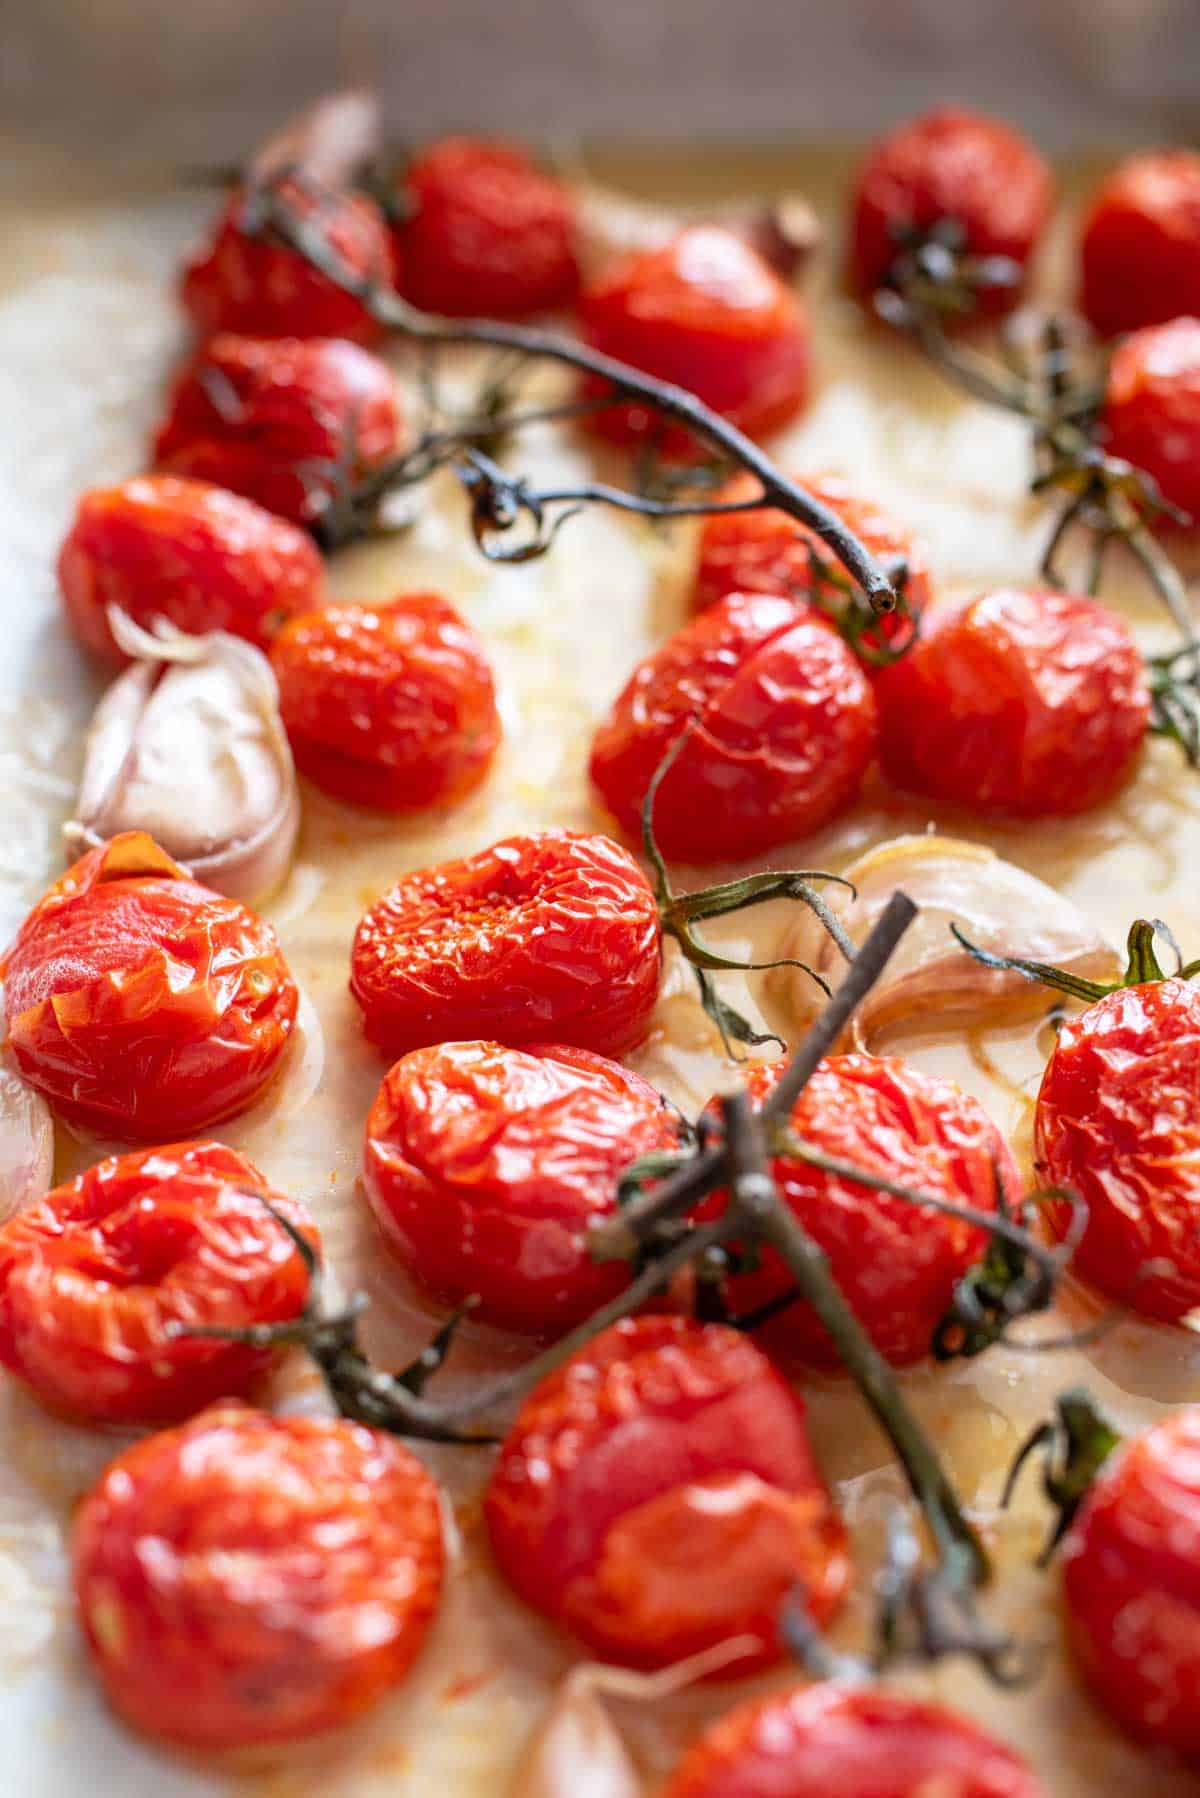 Roasted tomatoes with garlic and herbs on a baking sheet.